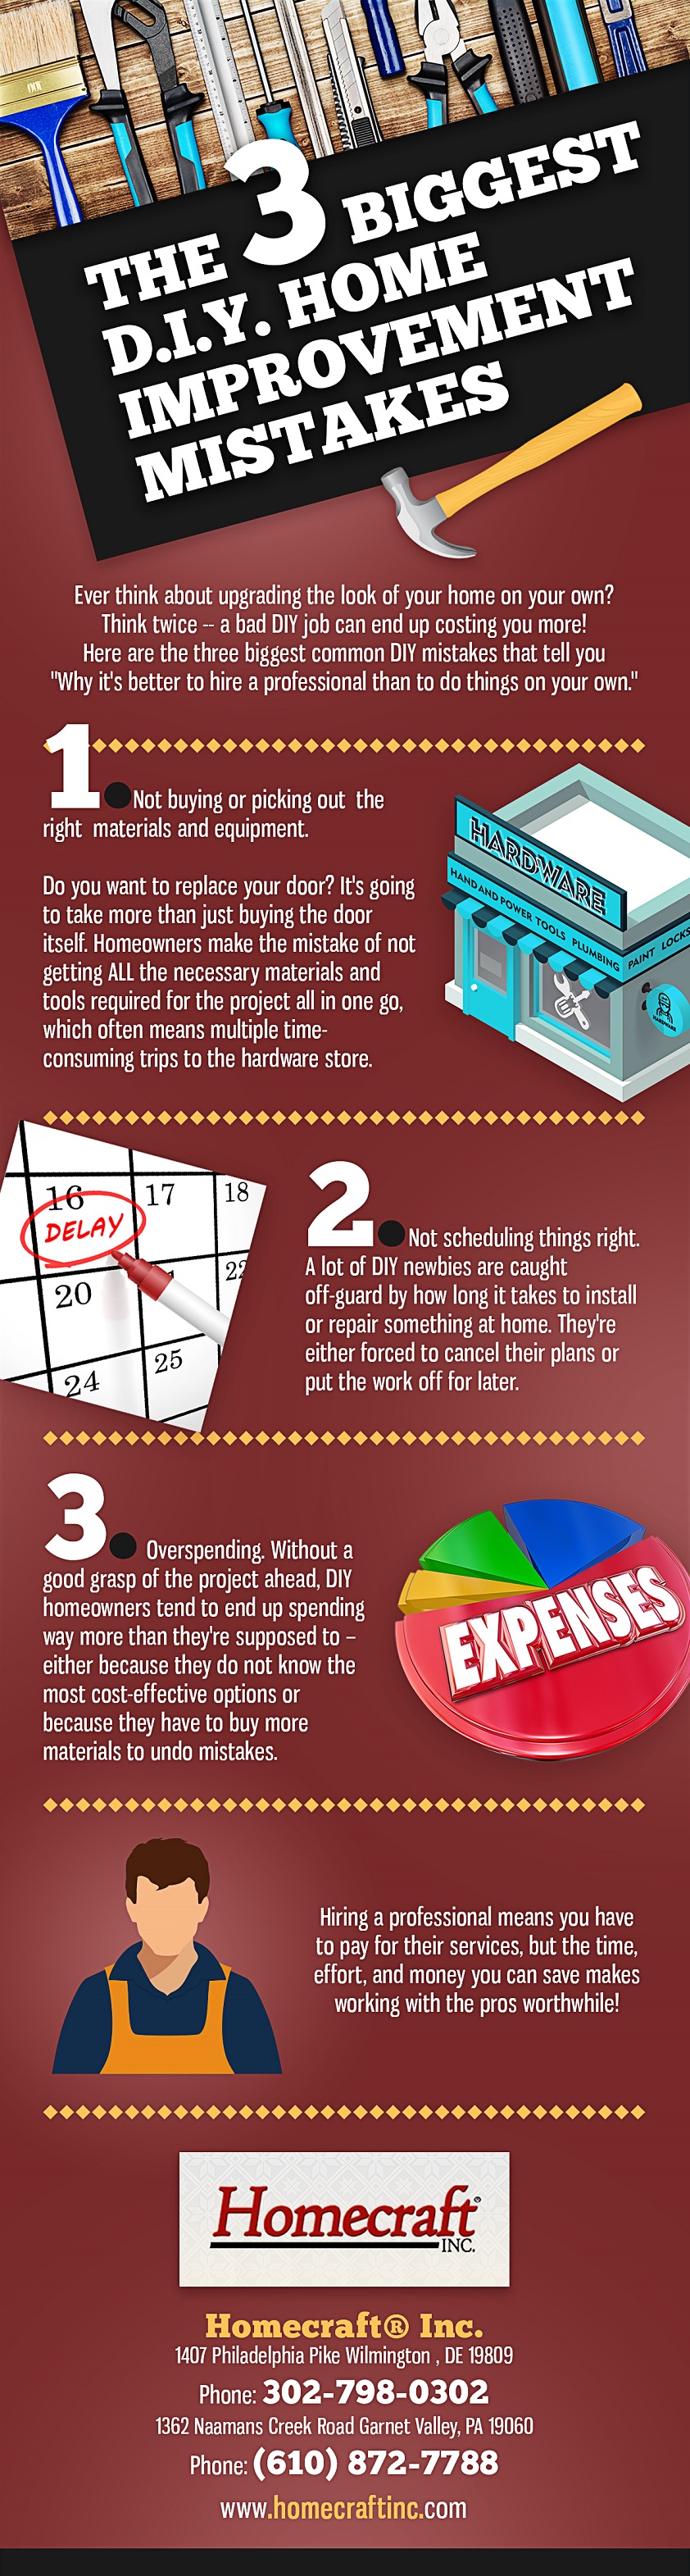 The Three Biggest DIY Home Improvement Mistakes